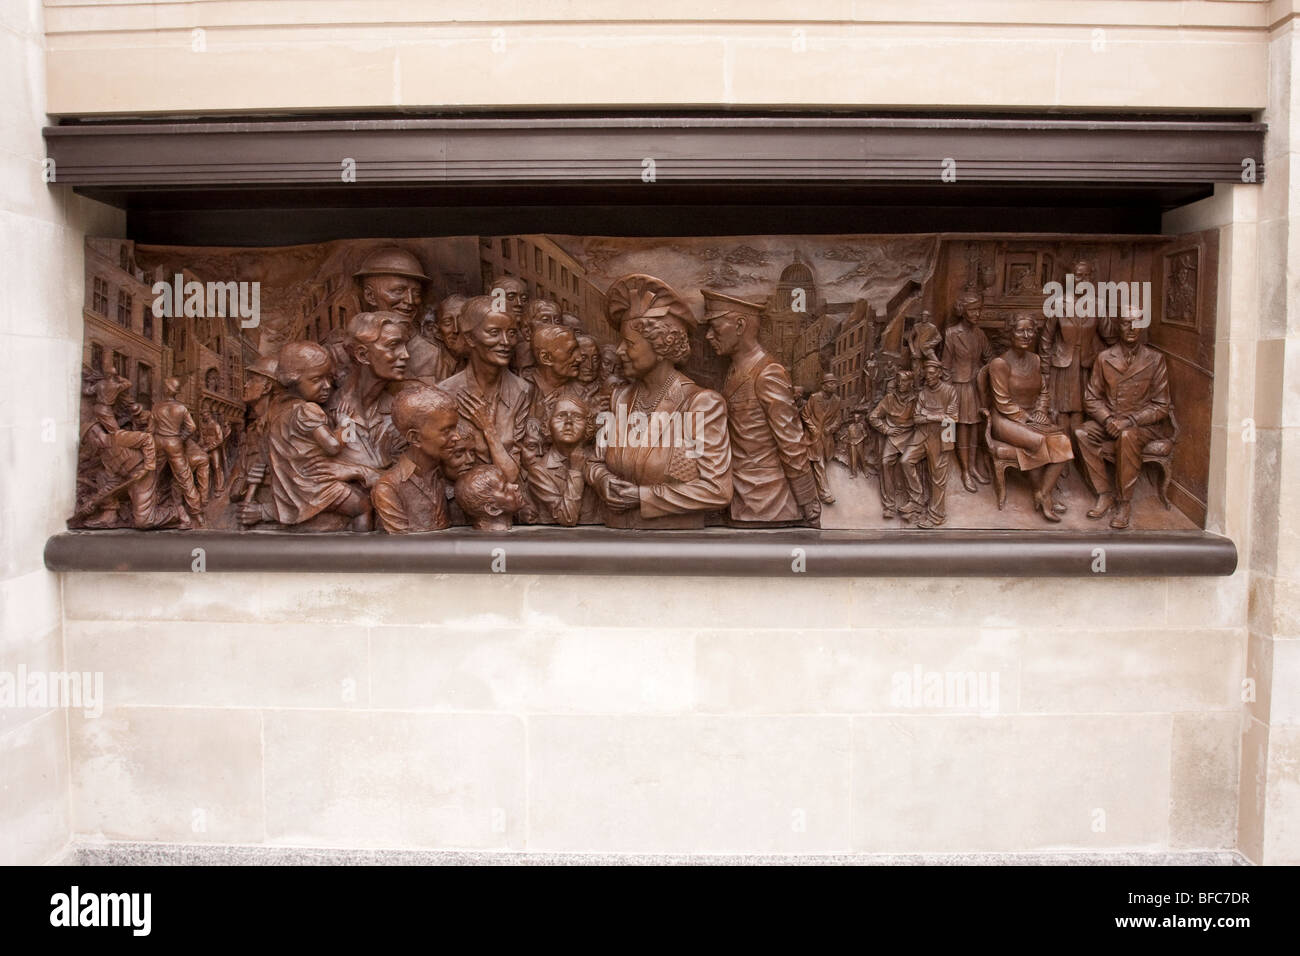 Sculpture by Paul Day depicting scenes from the second World War involving the Royal Family and people during the Blitz. Stock Photo